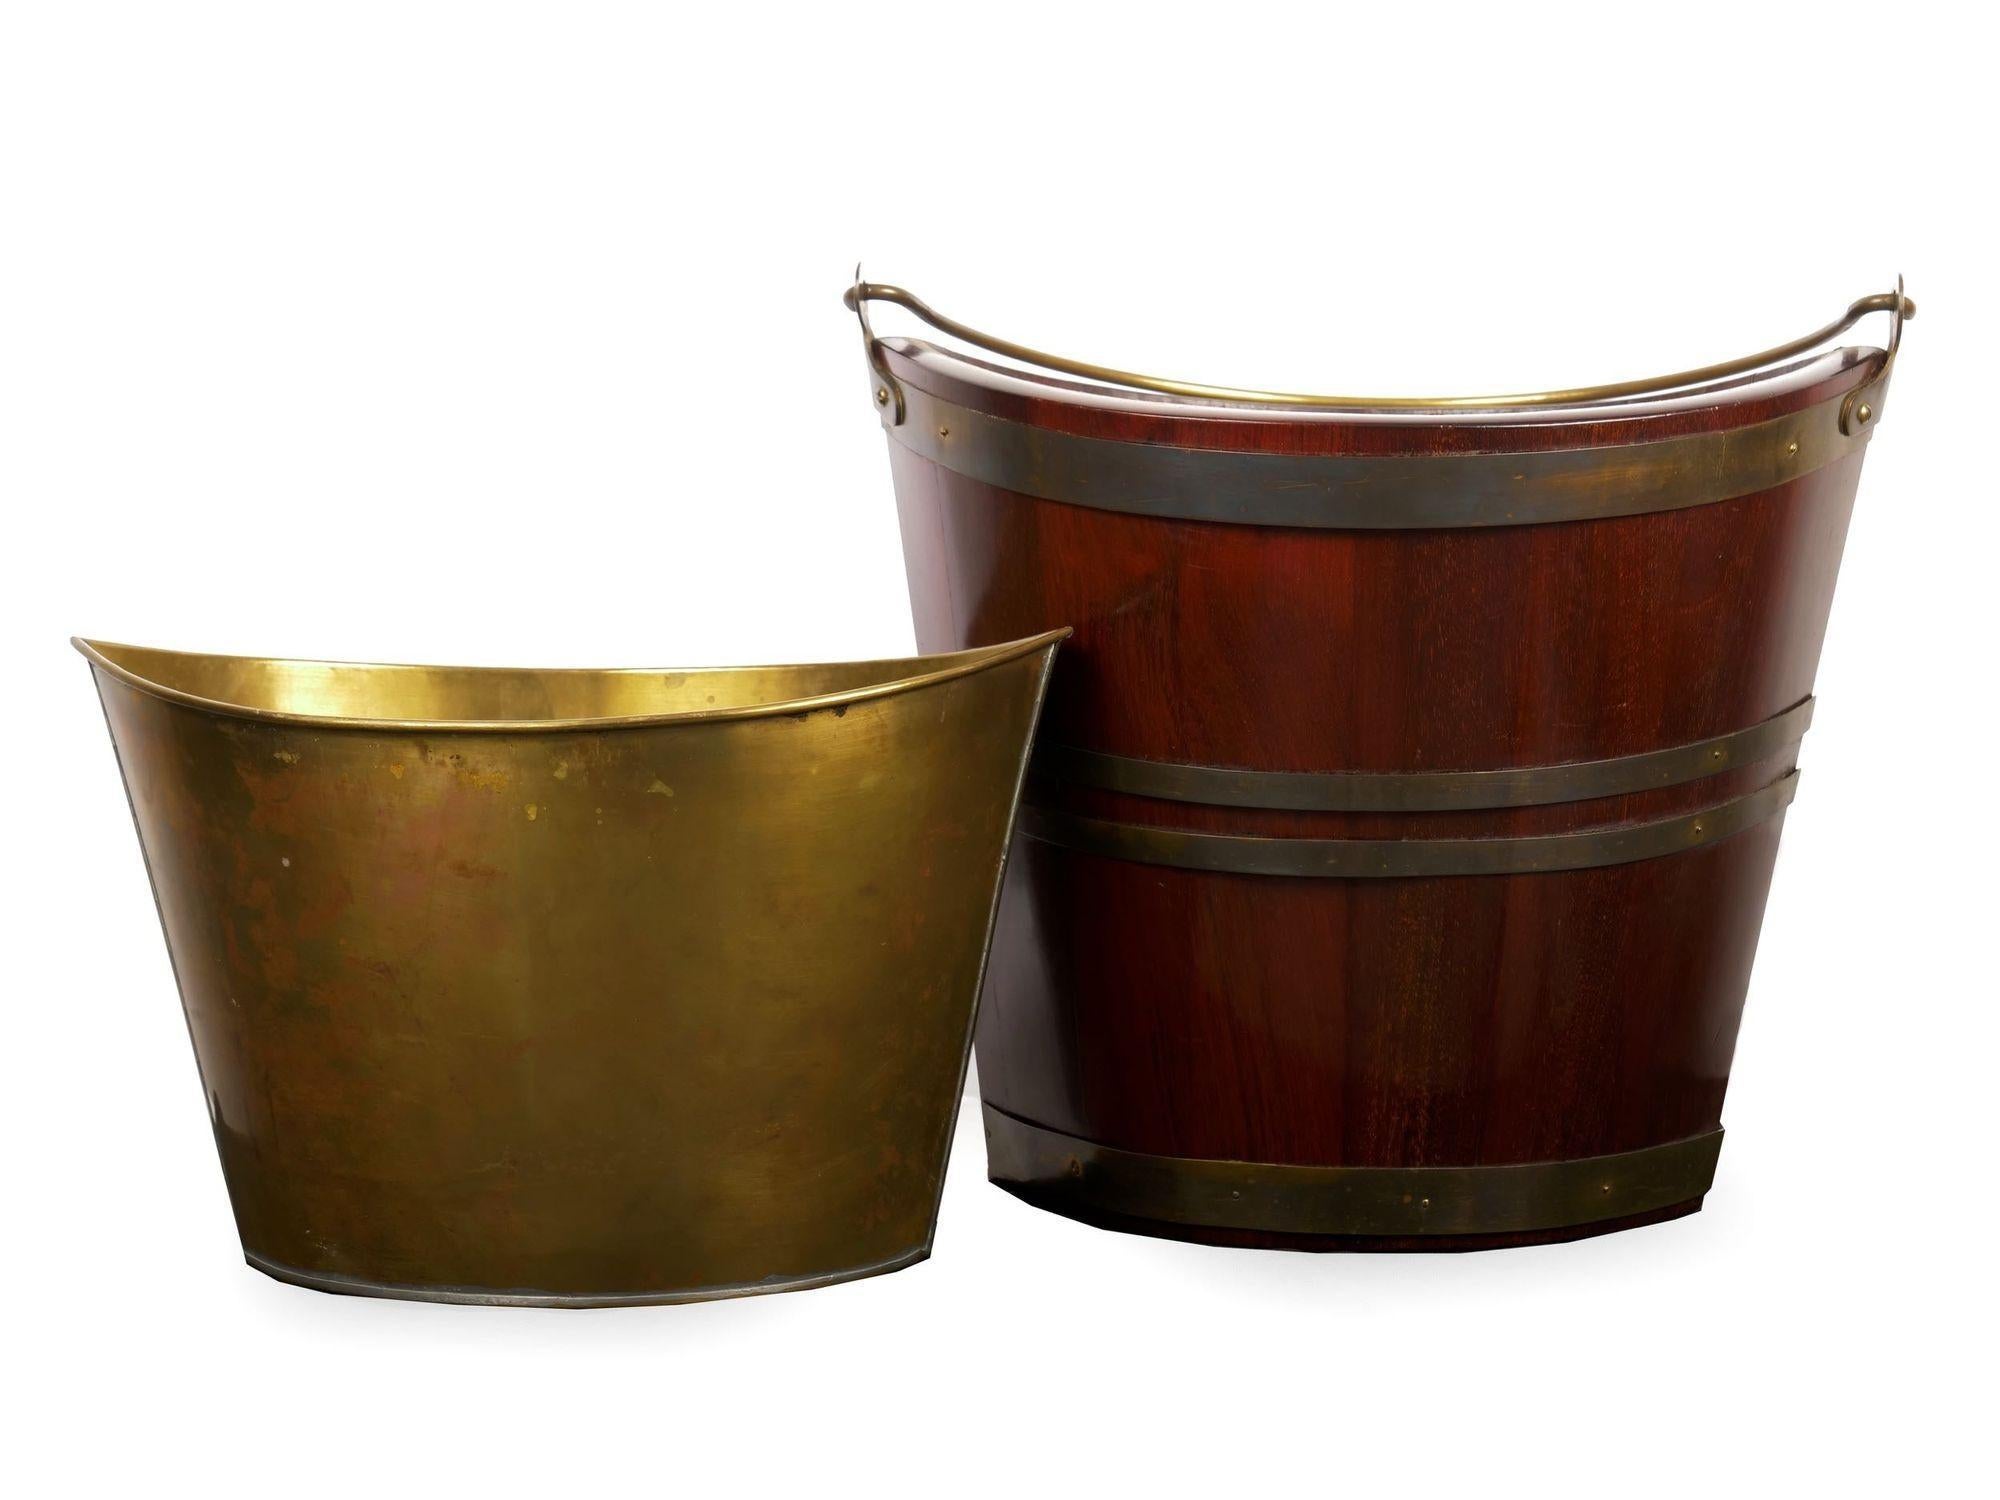 George III brass-bound mahogany peat bucket of navette form
With original brass bucket lining, circa early to mid-19th century
Item # C104012

This fine George III peat bucket is of navette form with a vertically staved tapering to the body